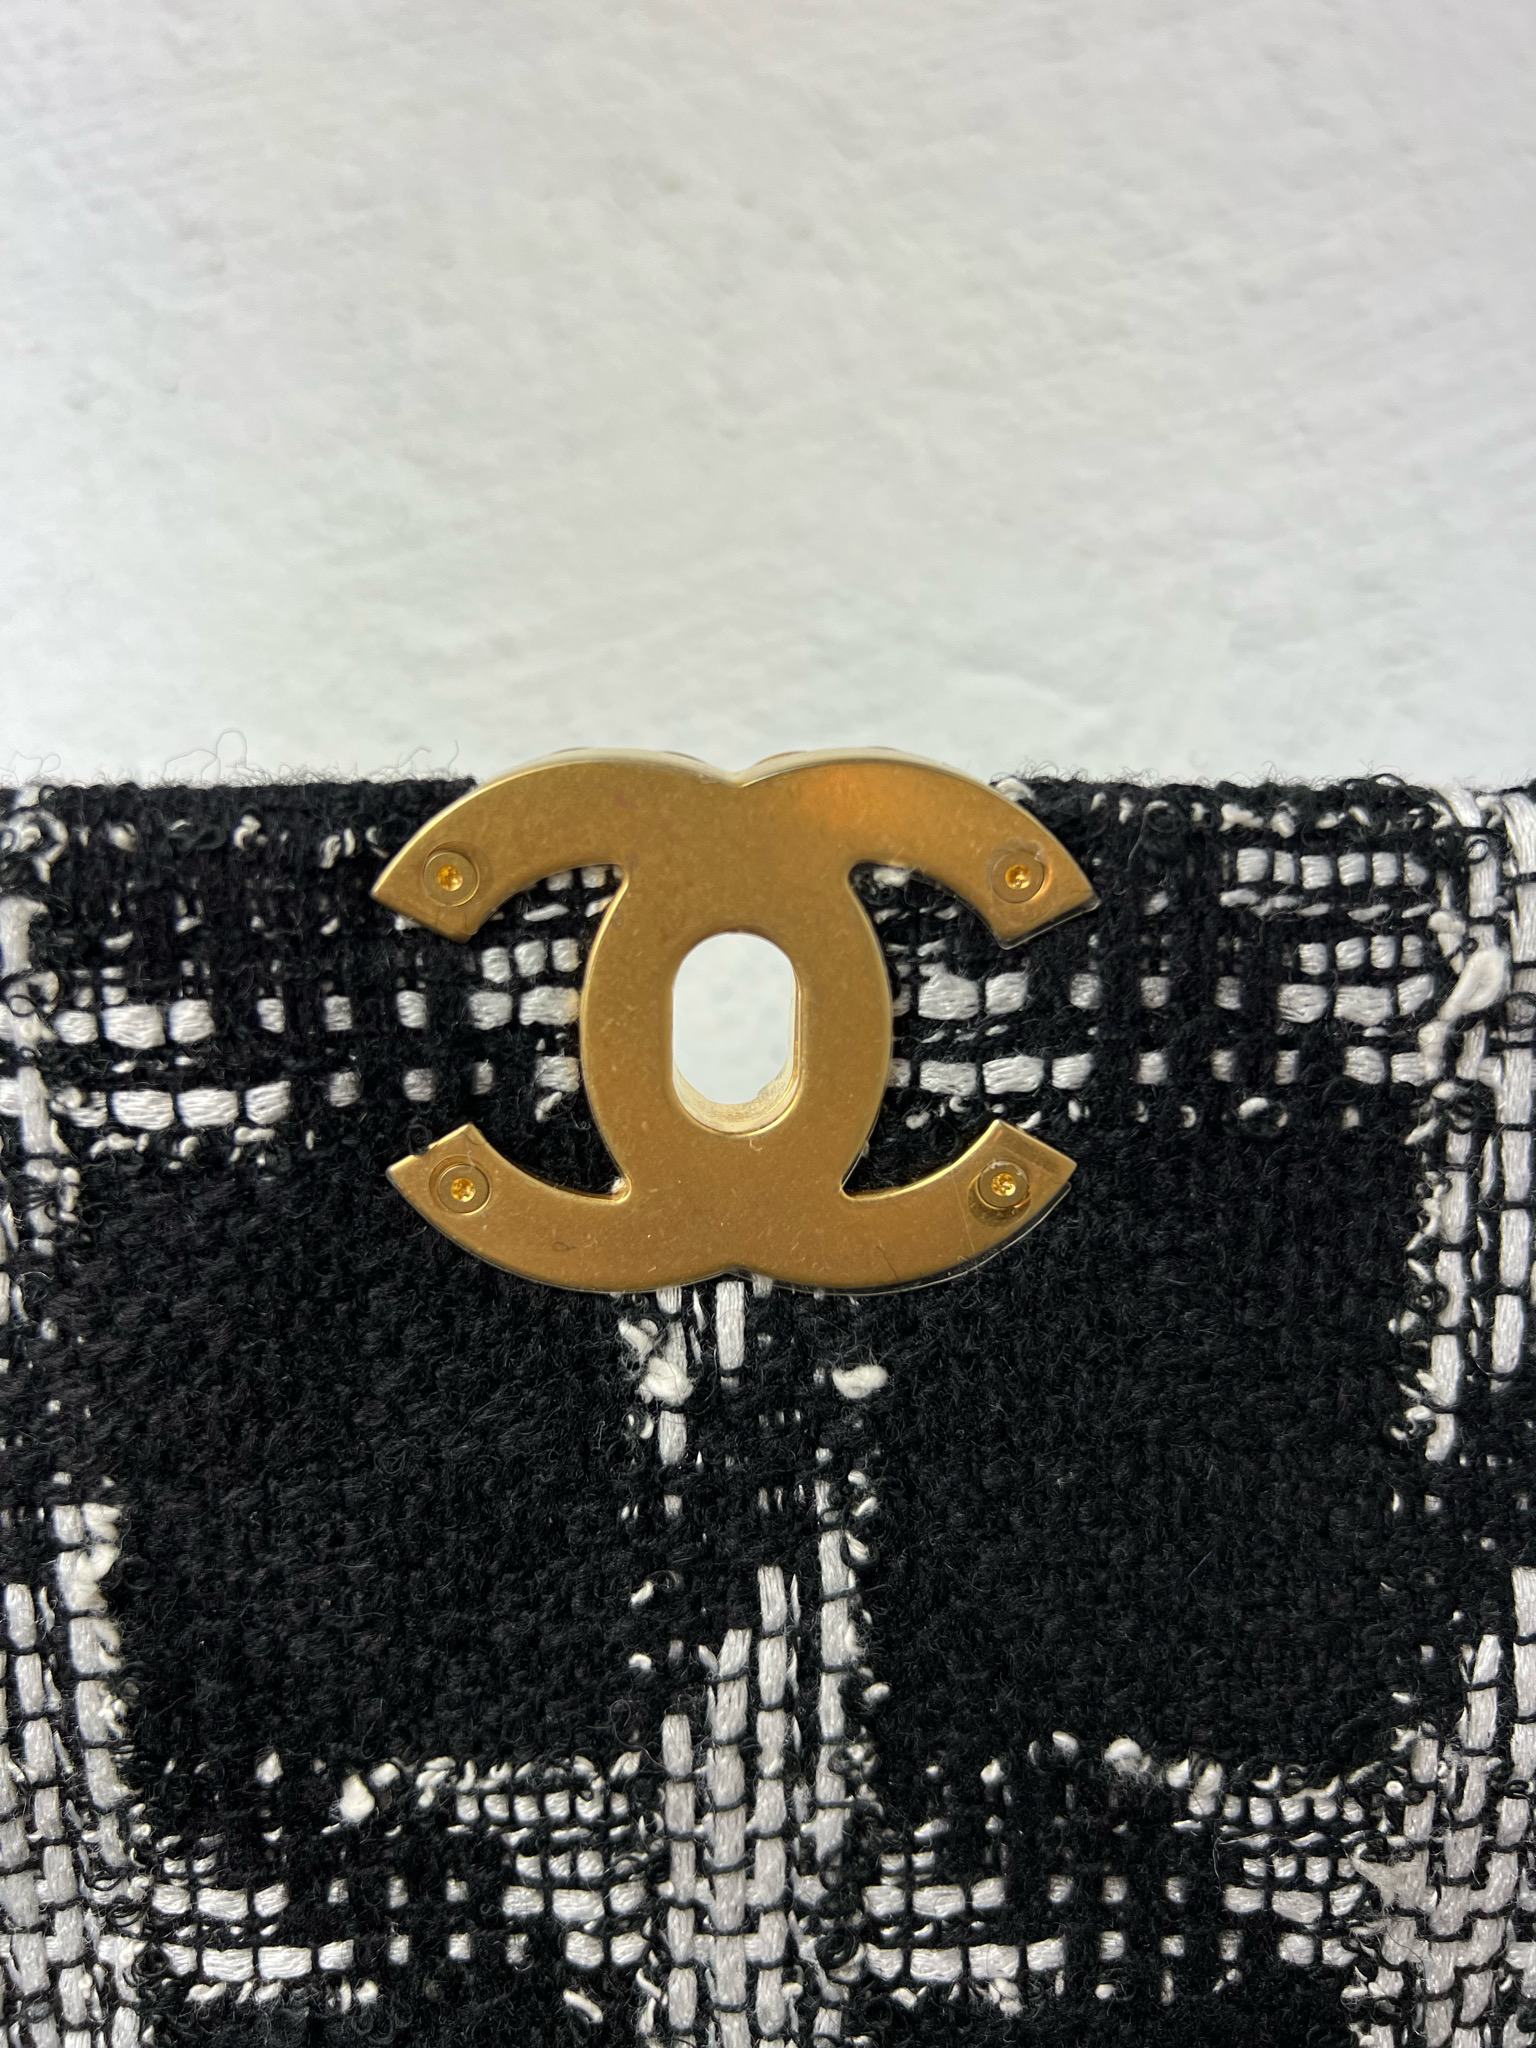 Chanel 19 Small, Black and White Tweed with Mixed Tone Hardware, Preowned  in Dustbag WA001